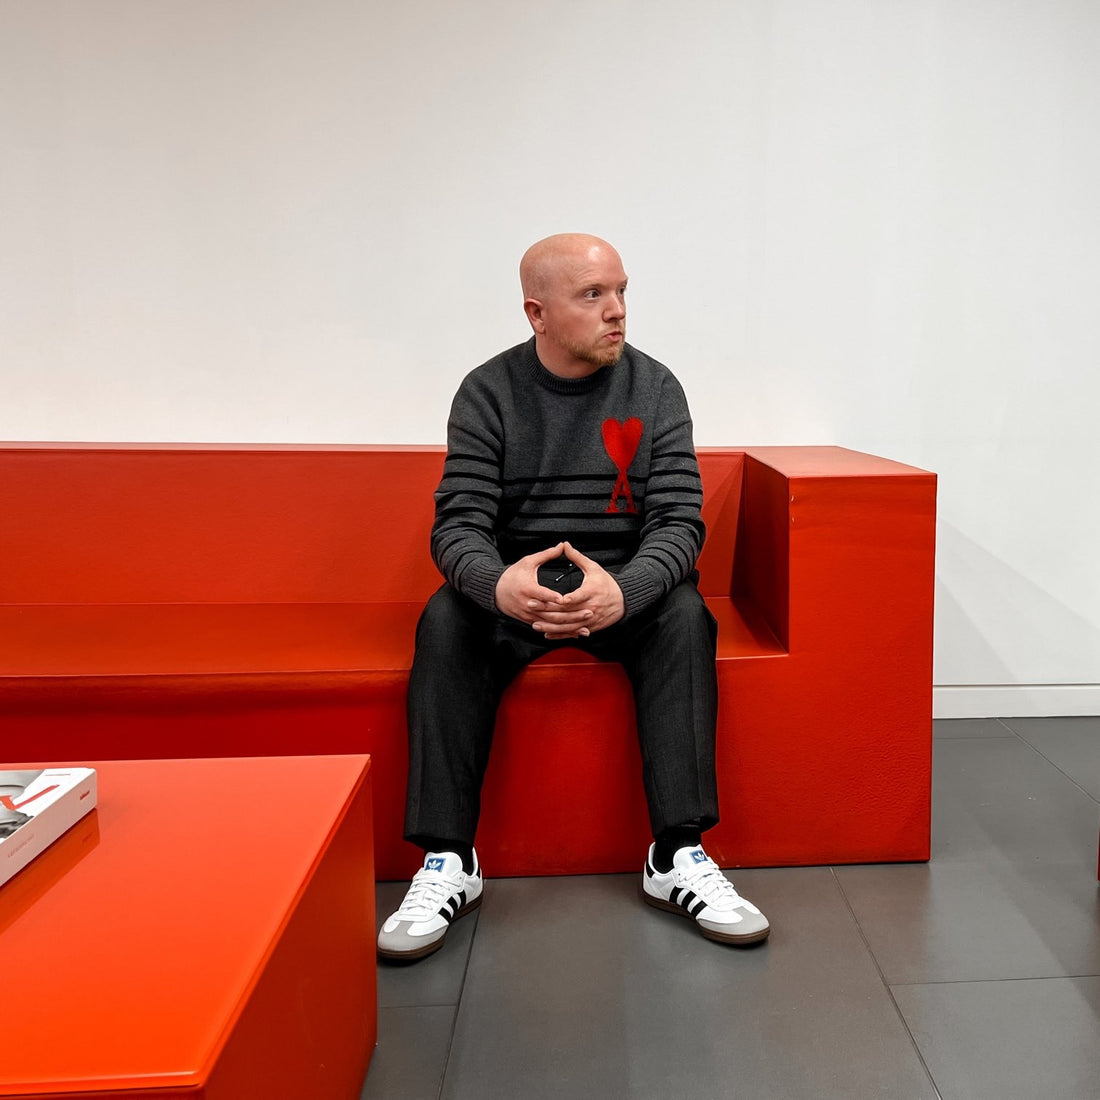 Kris is a bald fair-skinned man. He is sat on a red blocky sofa, wearing a grey striped jumper, with black trousers and white trainers